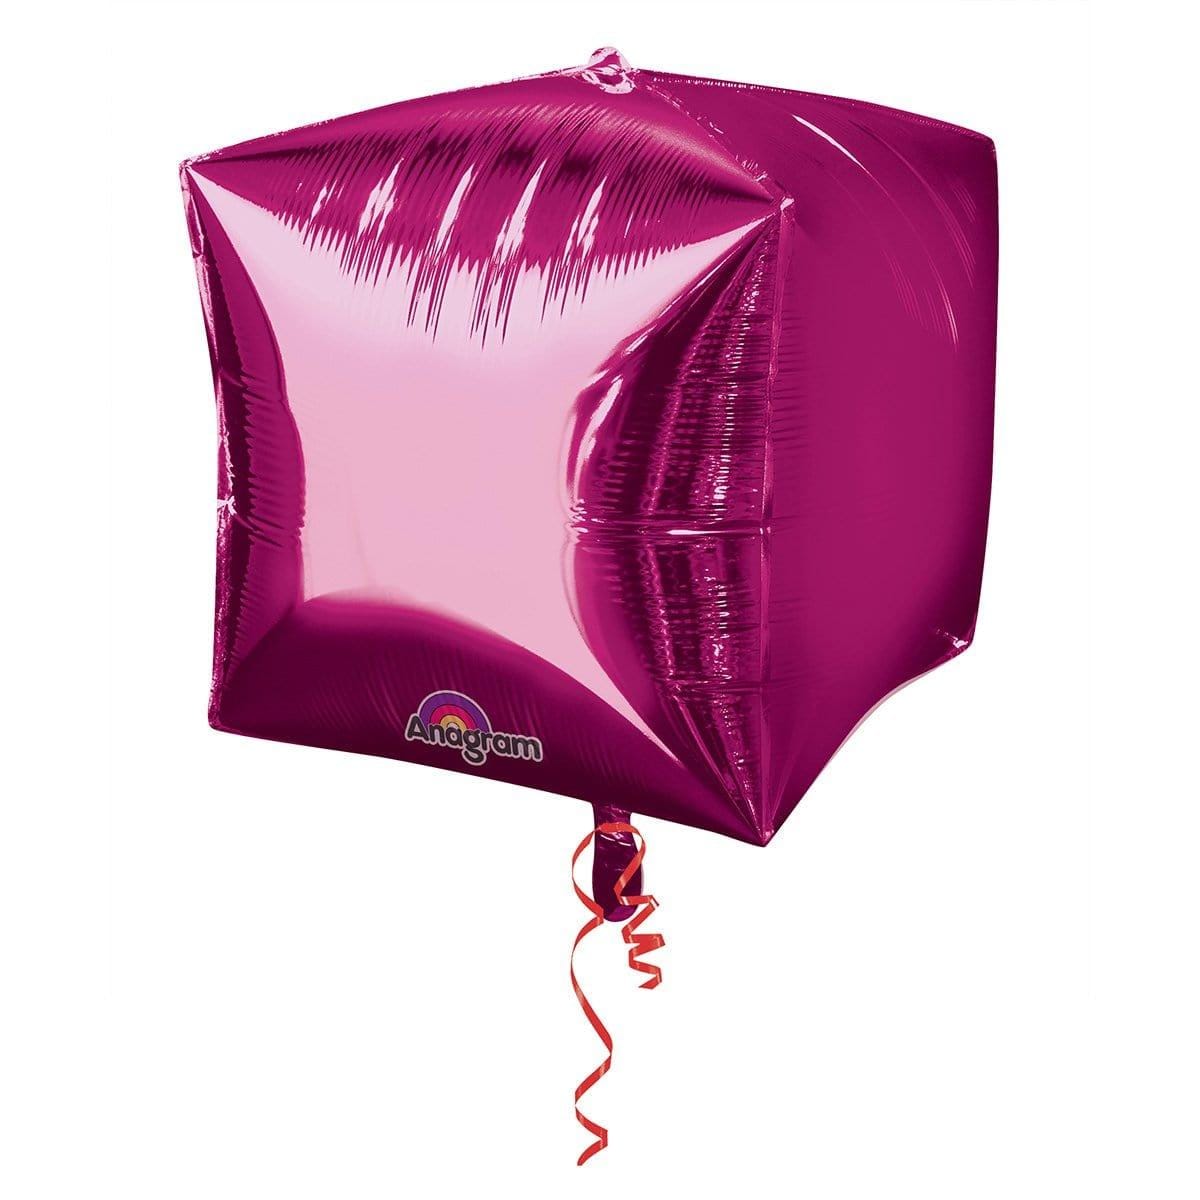 Buy Balloons Bright Pink Cubez Balloon, 15 Inches sold at Party Expert